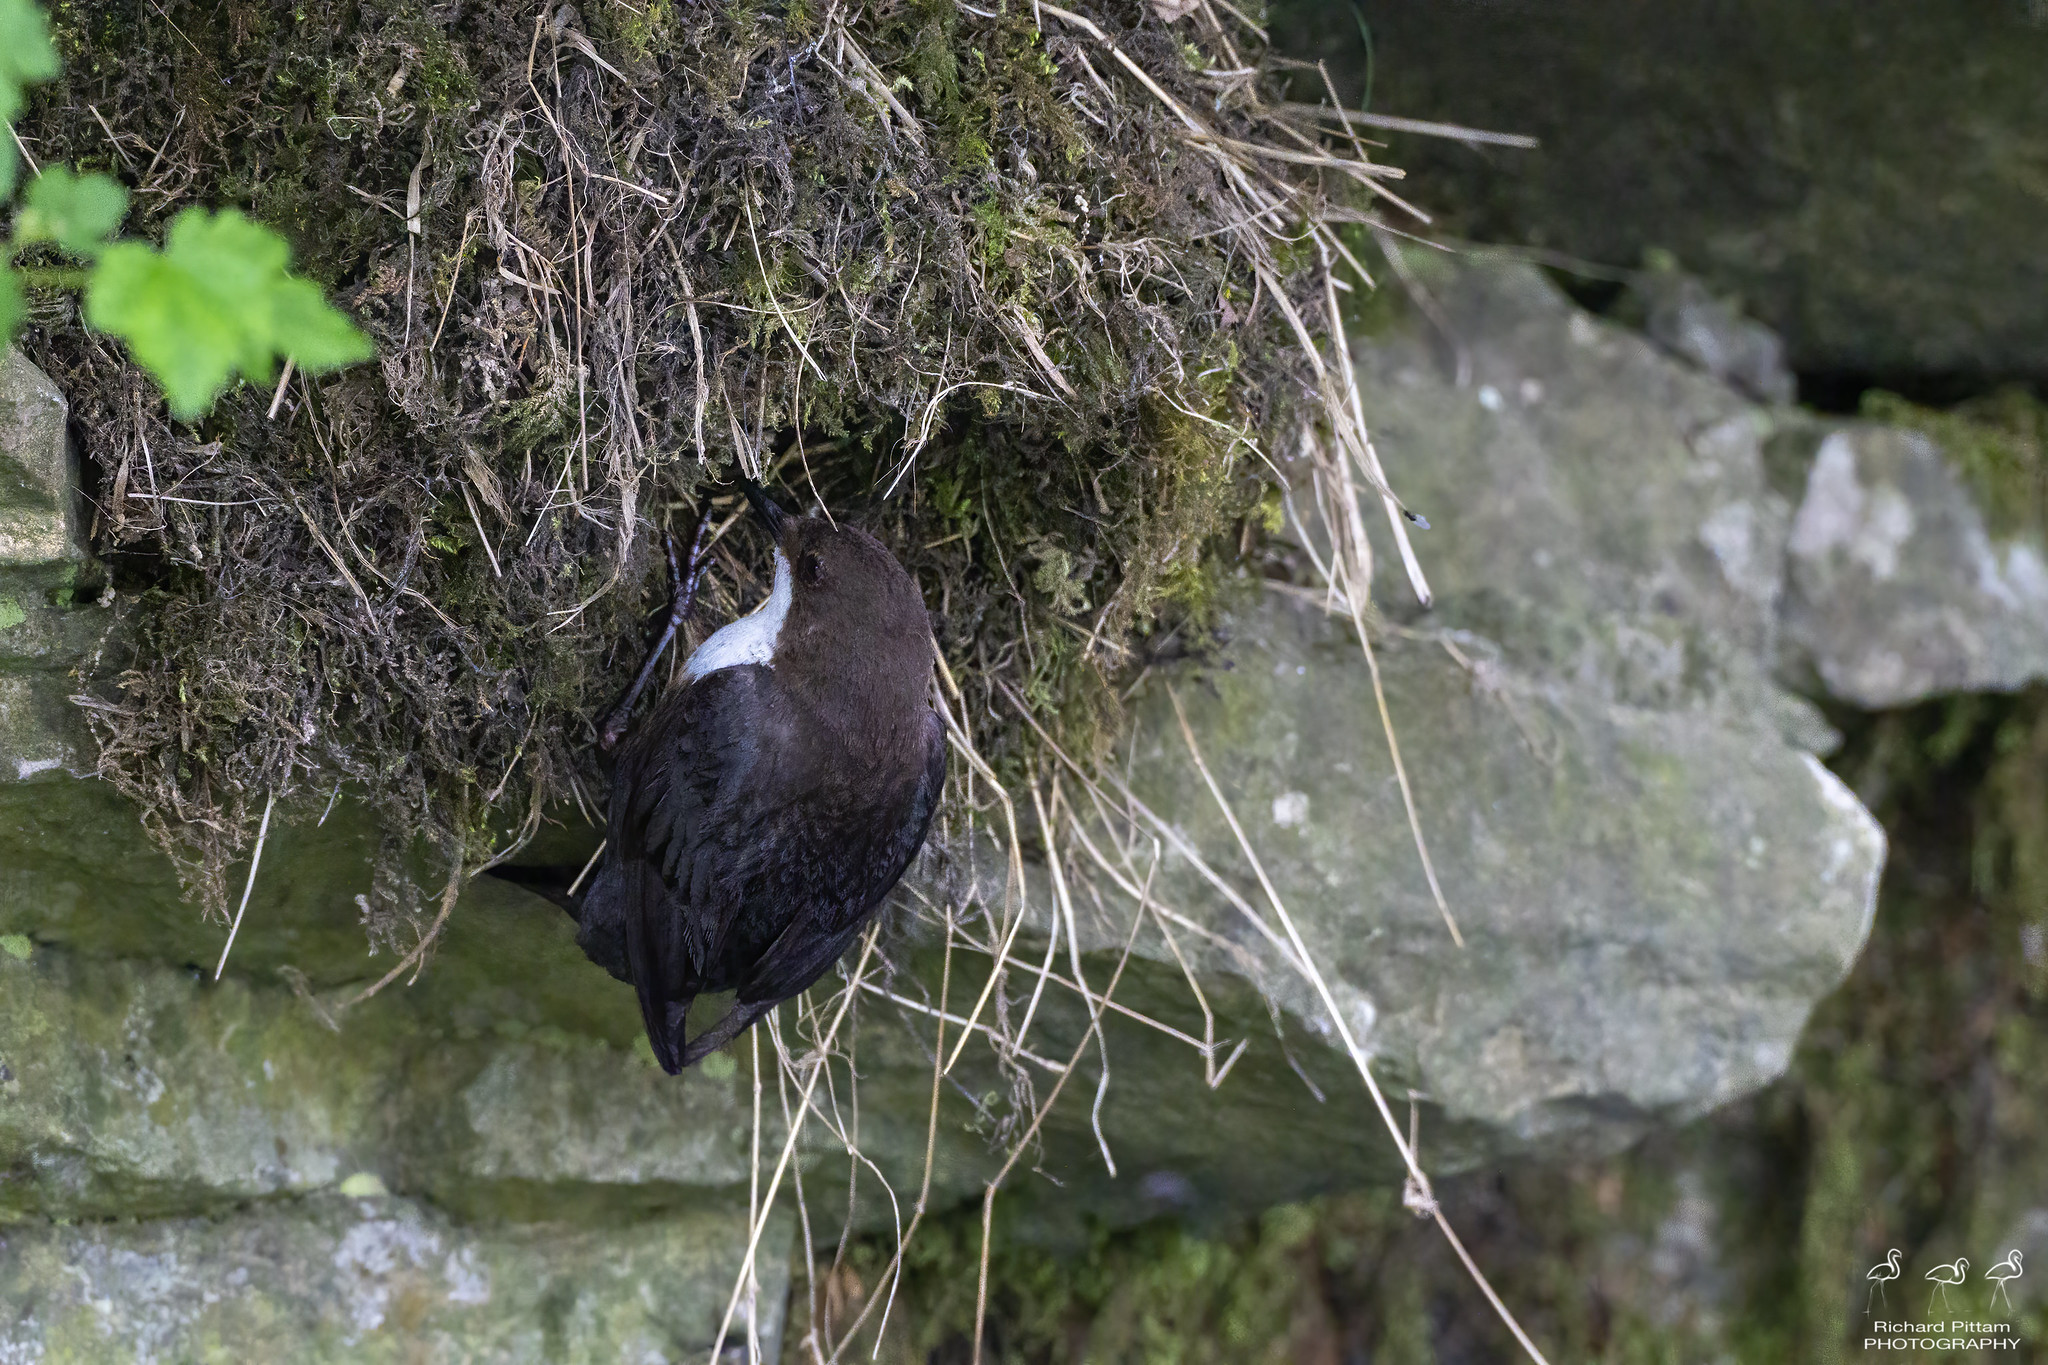 Dipper feeding young at the nest